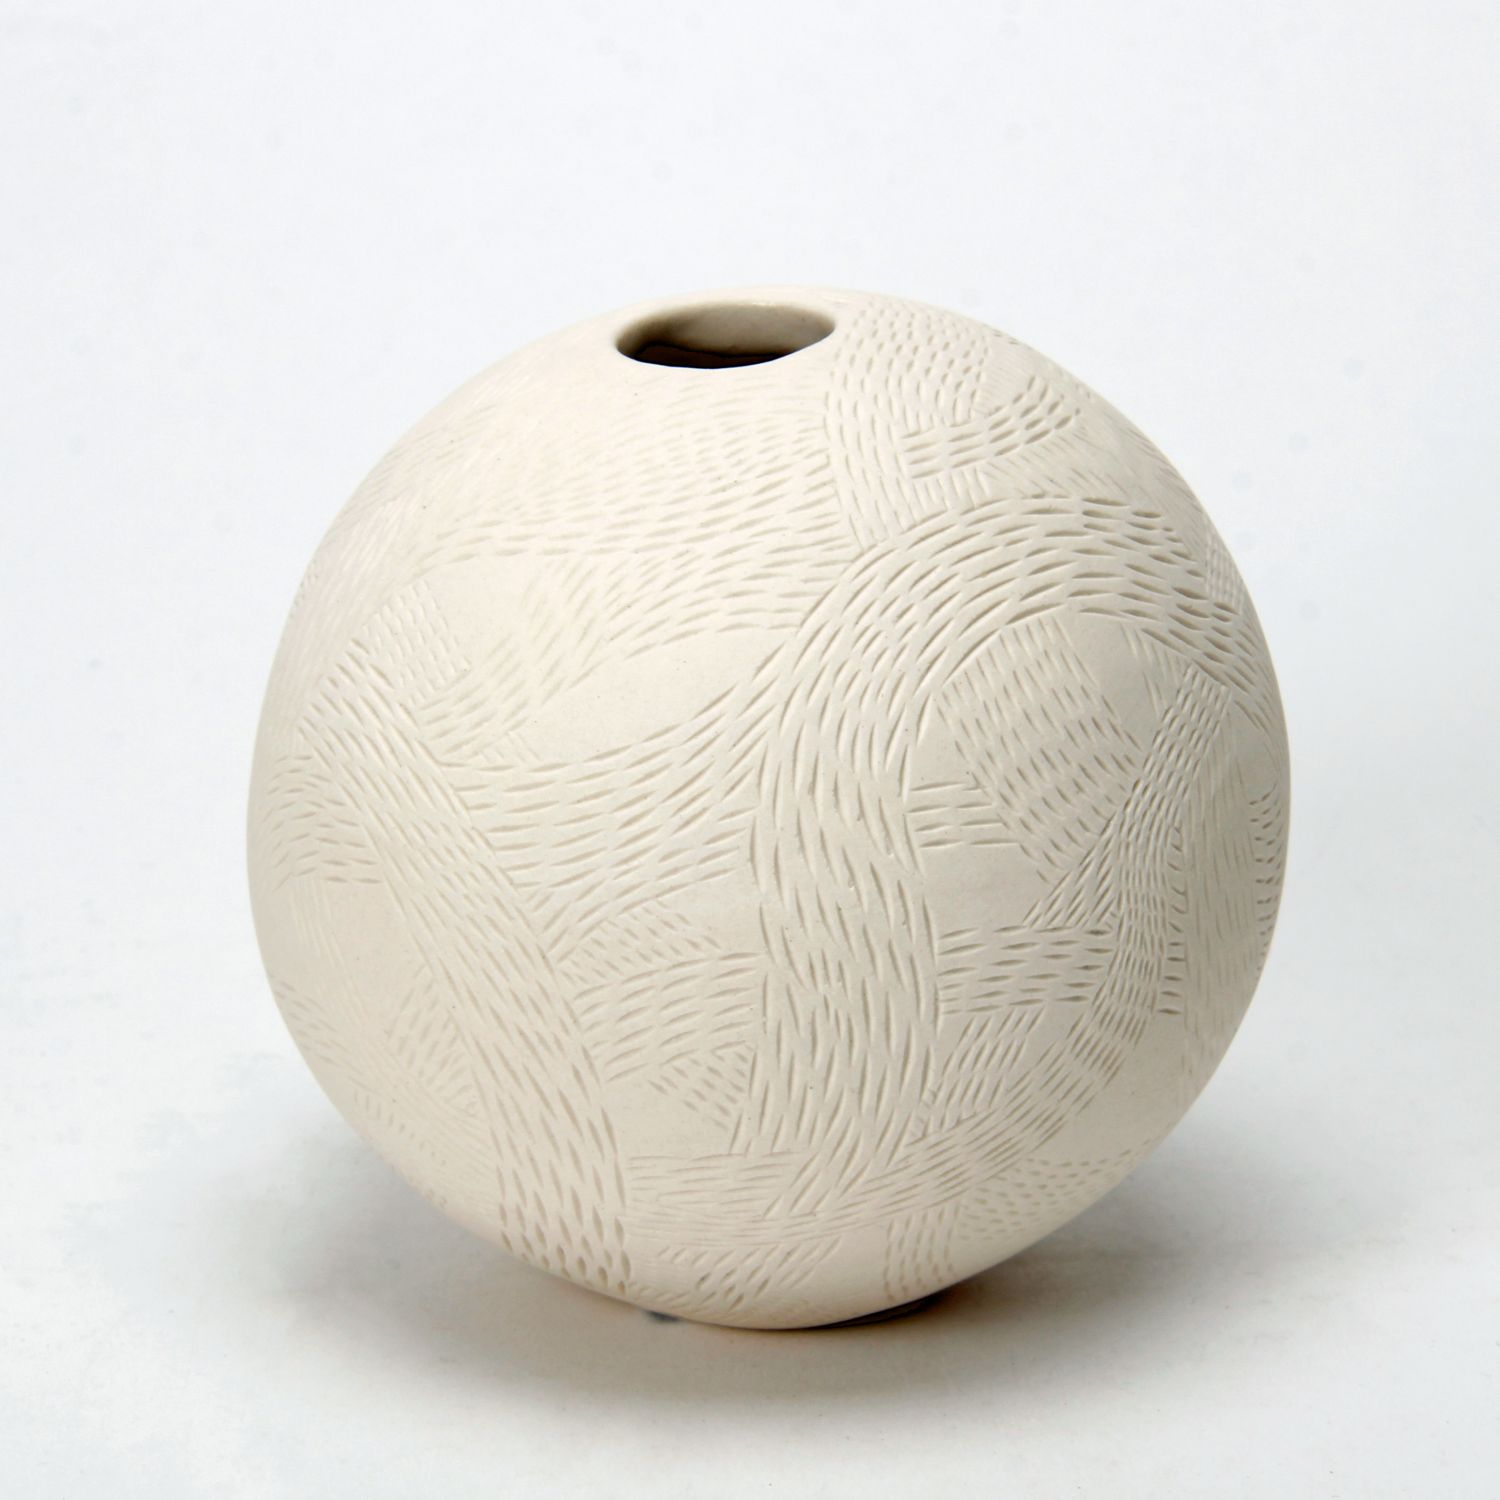 Talia Silva: Subtle Echoes – Orb Vessel Fully Carved Product Image 1 of 2